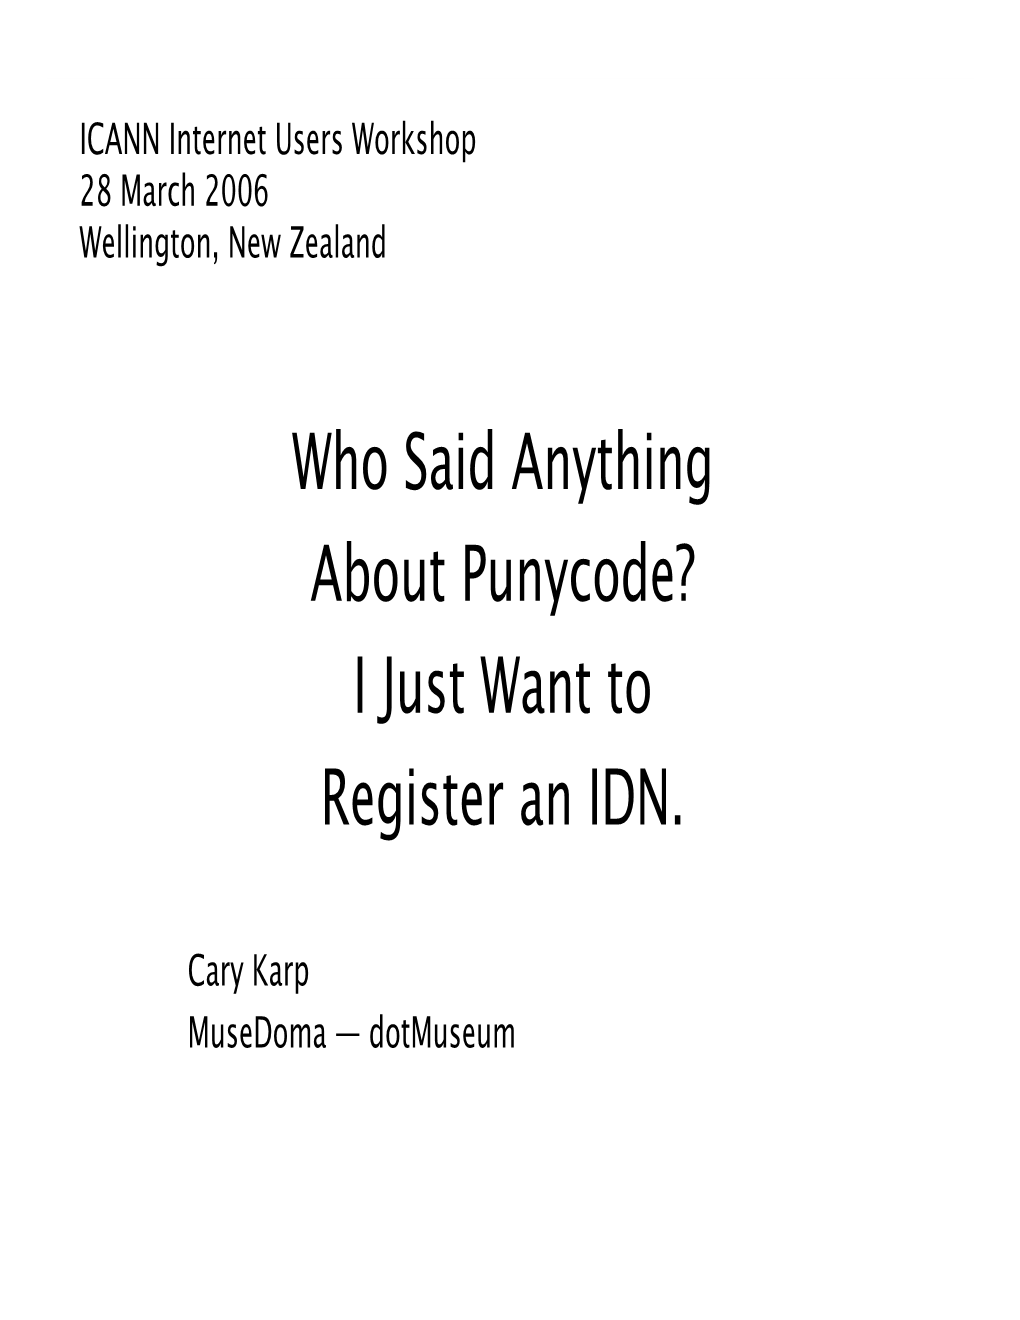 Who Said Anything About Punycode? I Just Want to Register an IDN